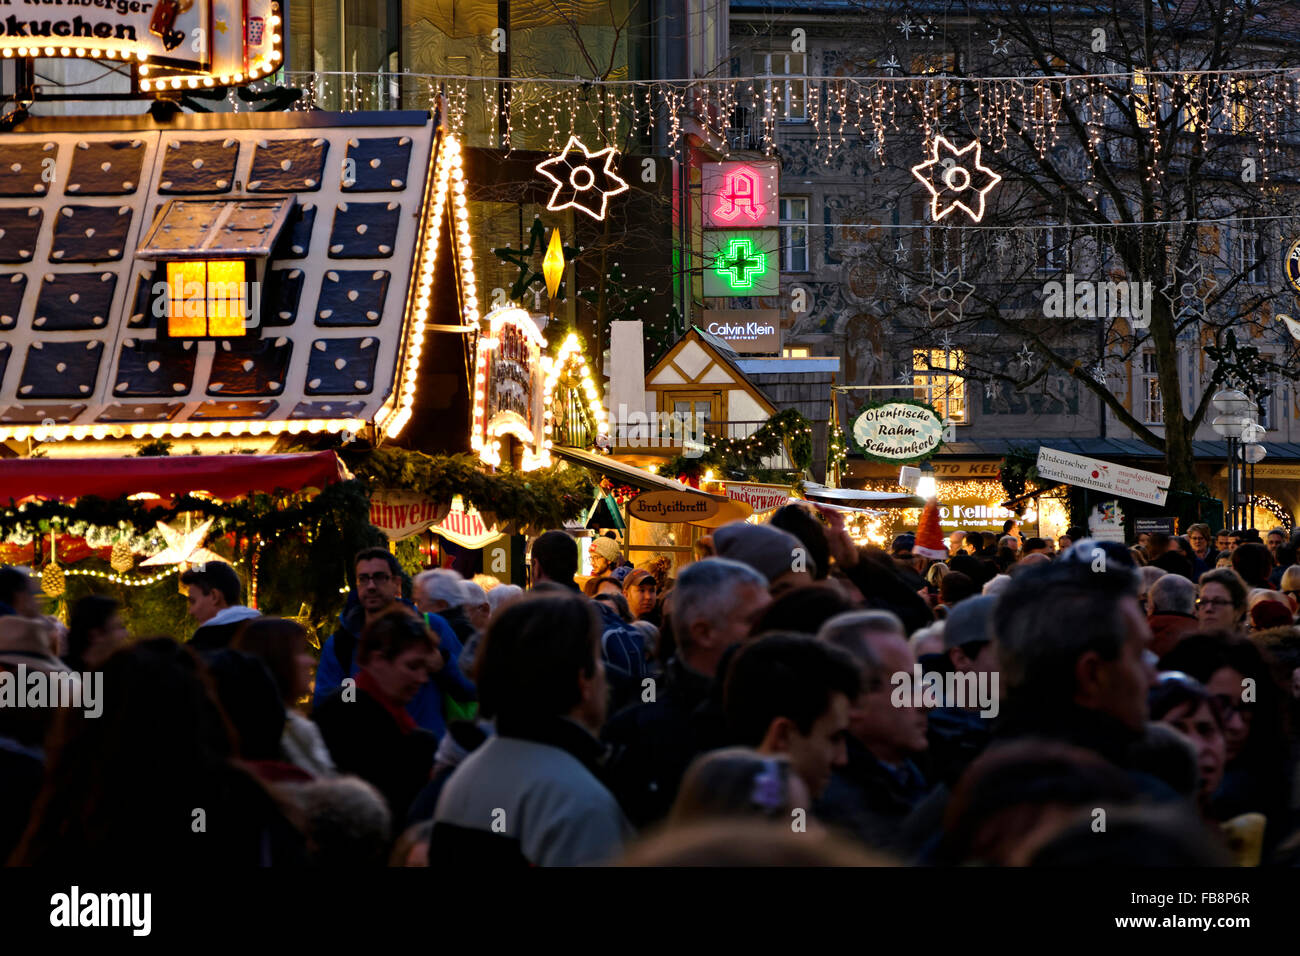 Shoppers at the German Christmas markets, Munich, Upper Bavaria, Germany, Europe. Stock Photo